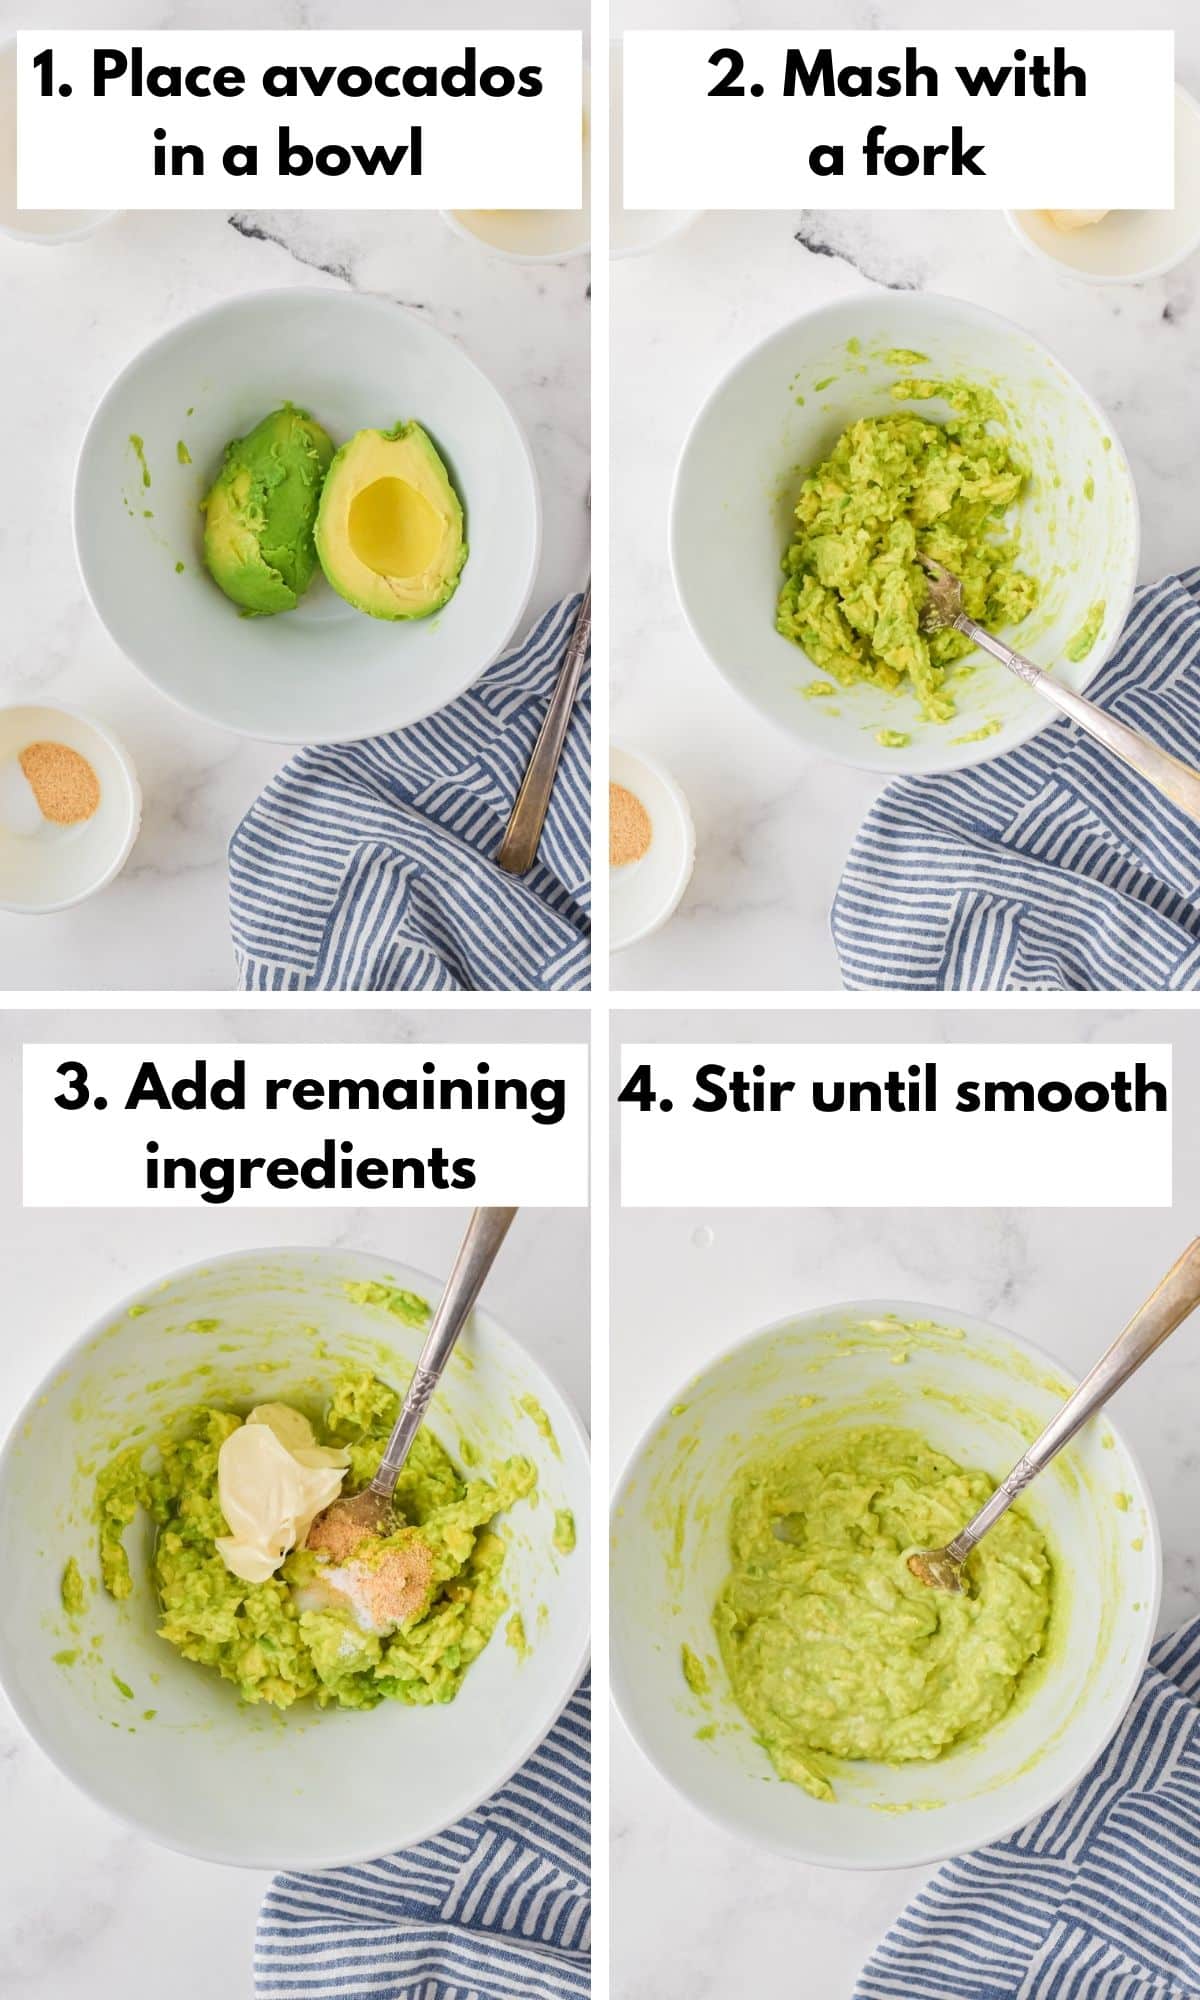 Step-by-step photos of making dairy-free avocado spread in a bowl.